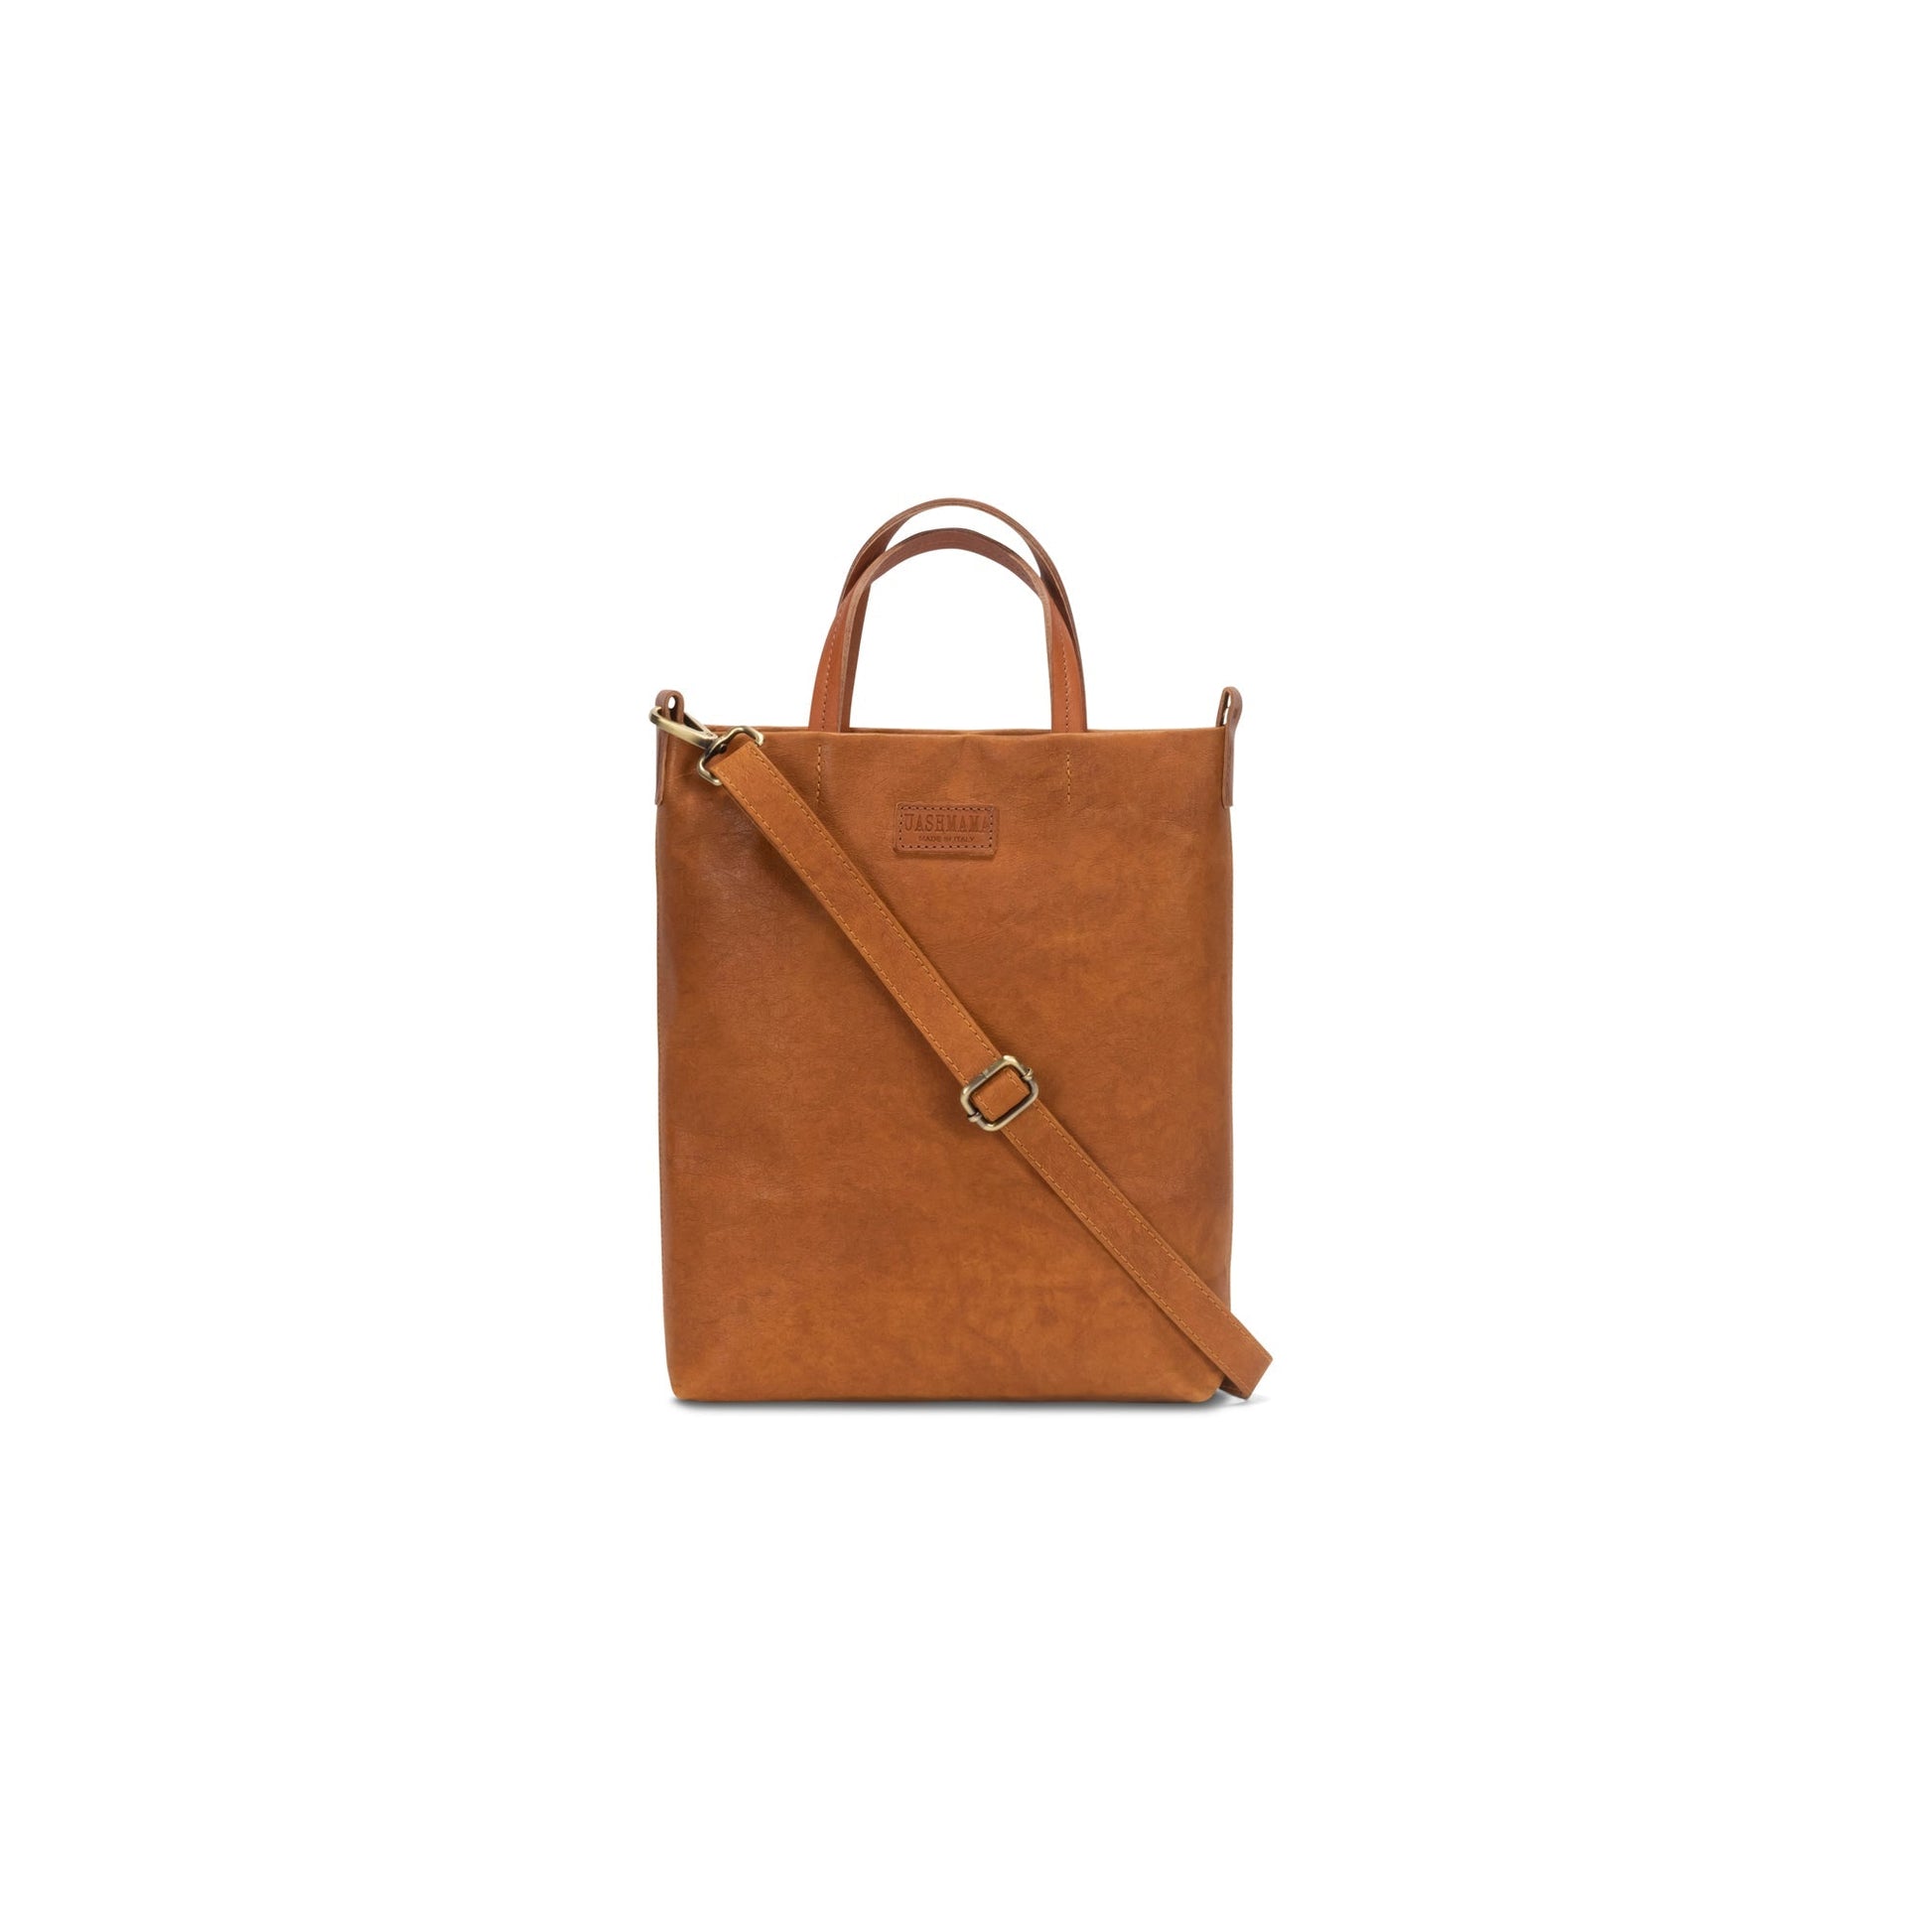 A washable paper tote bag is shown from the front angle. It has a relaxed shape, two top handles and a long shoulder strap. It is rich tan in colour.